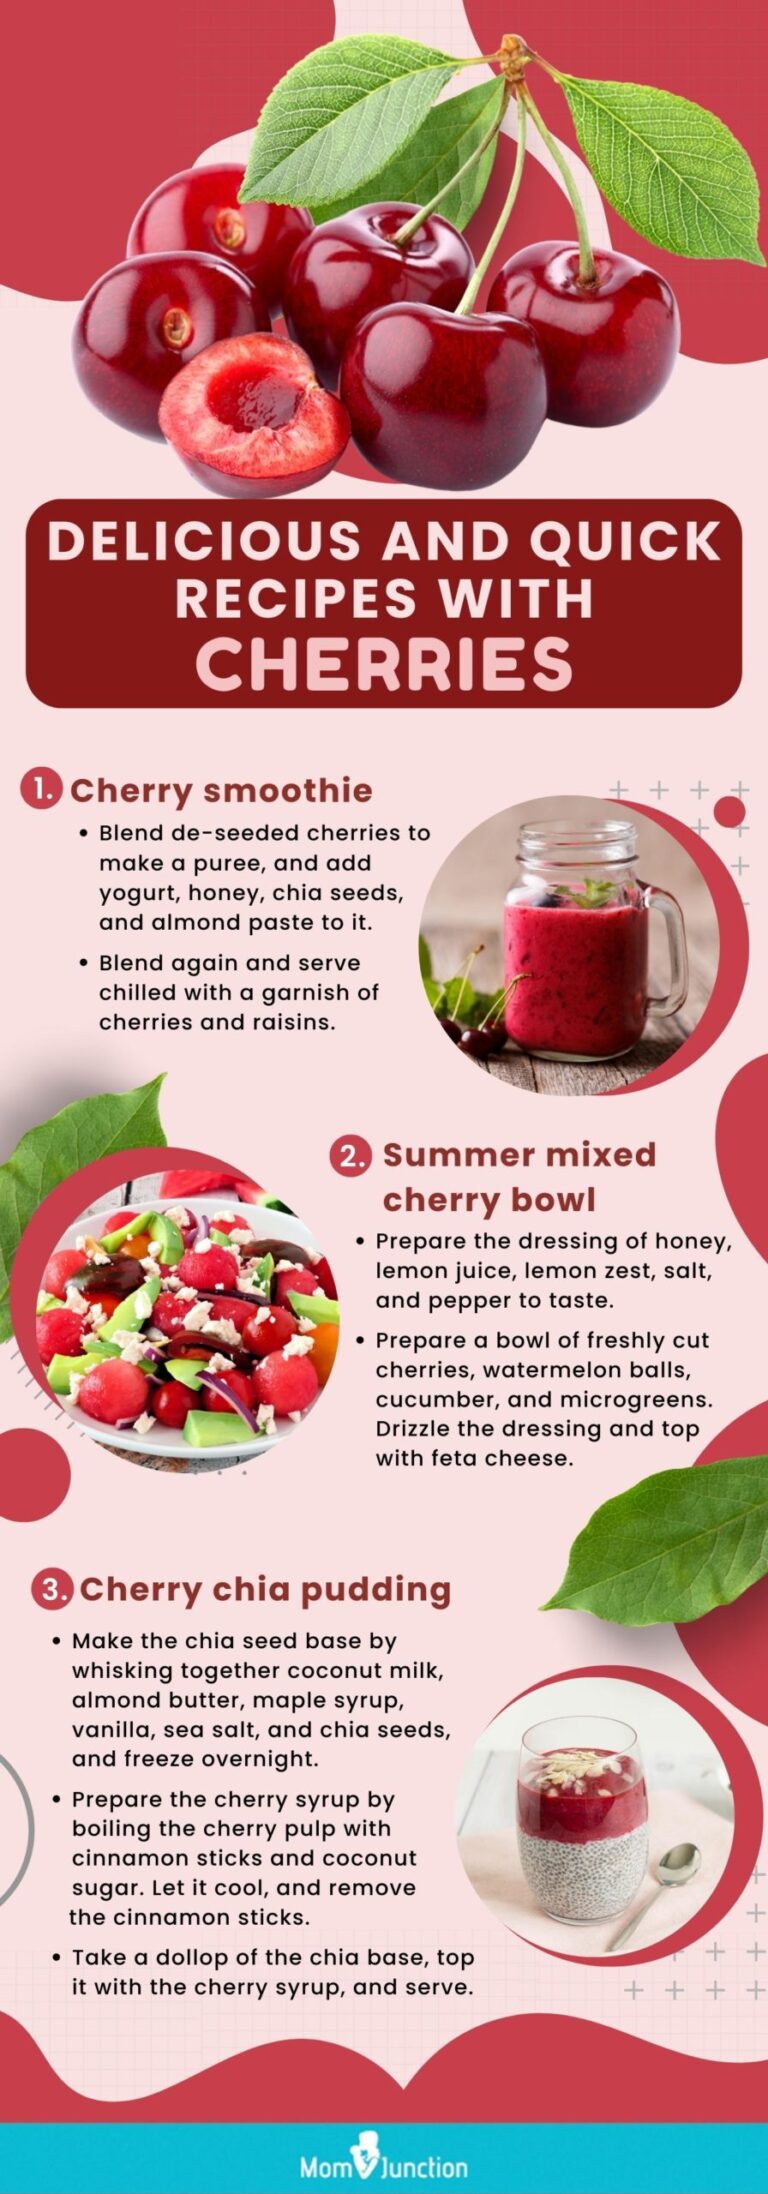 Can You Drink Tart Cherry Juice While Pregnant?